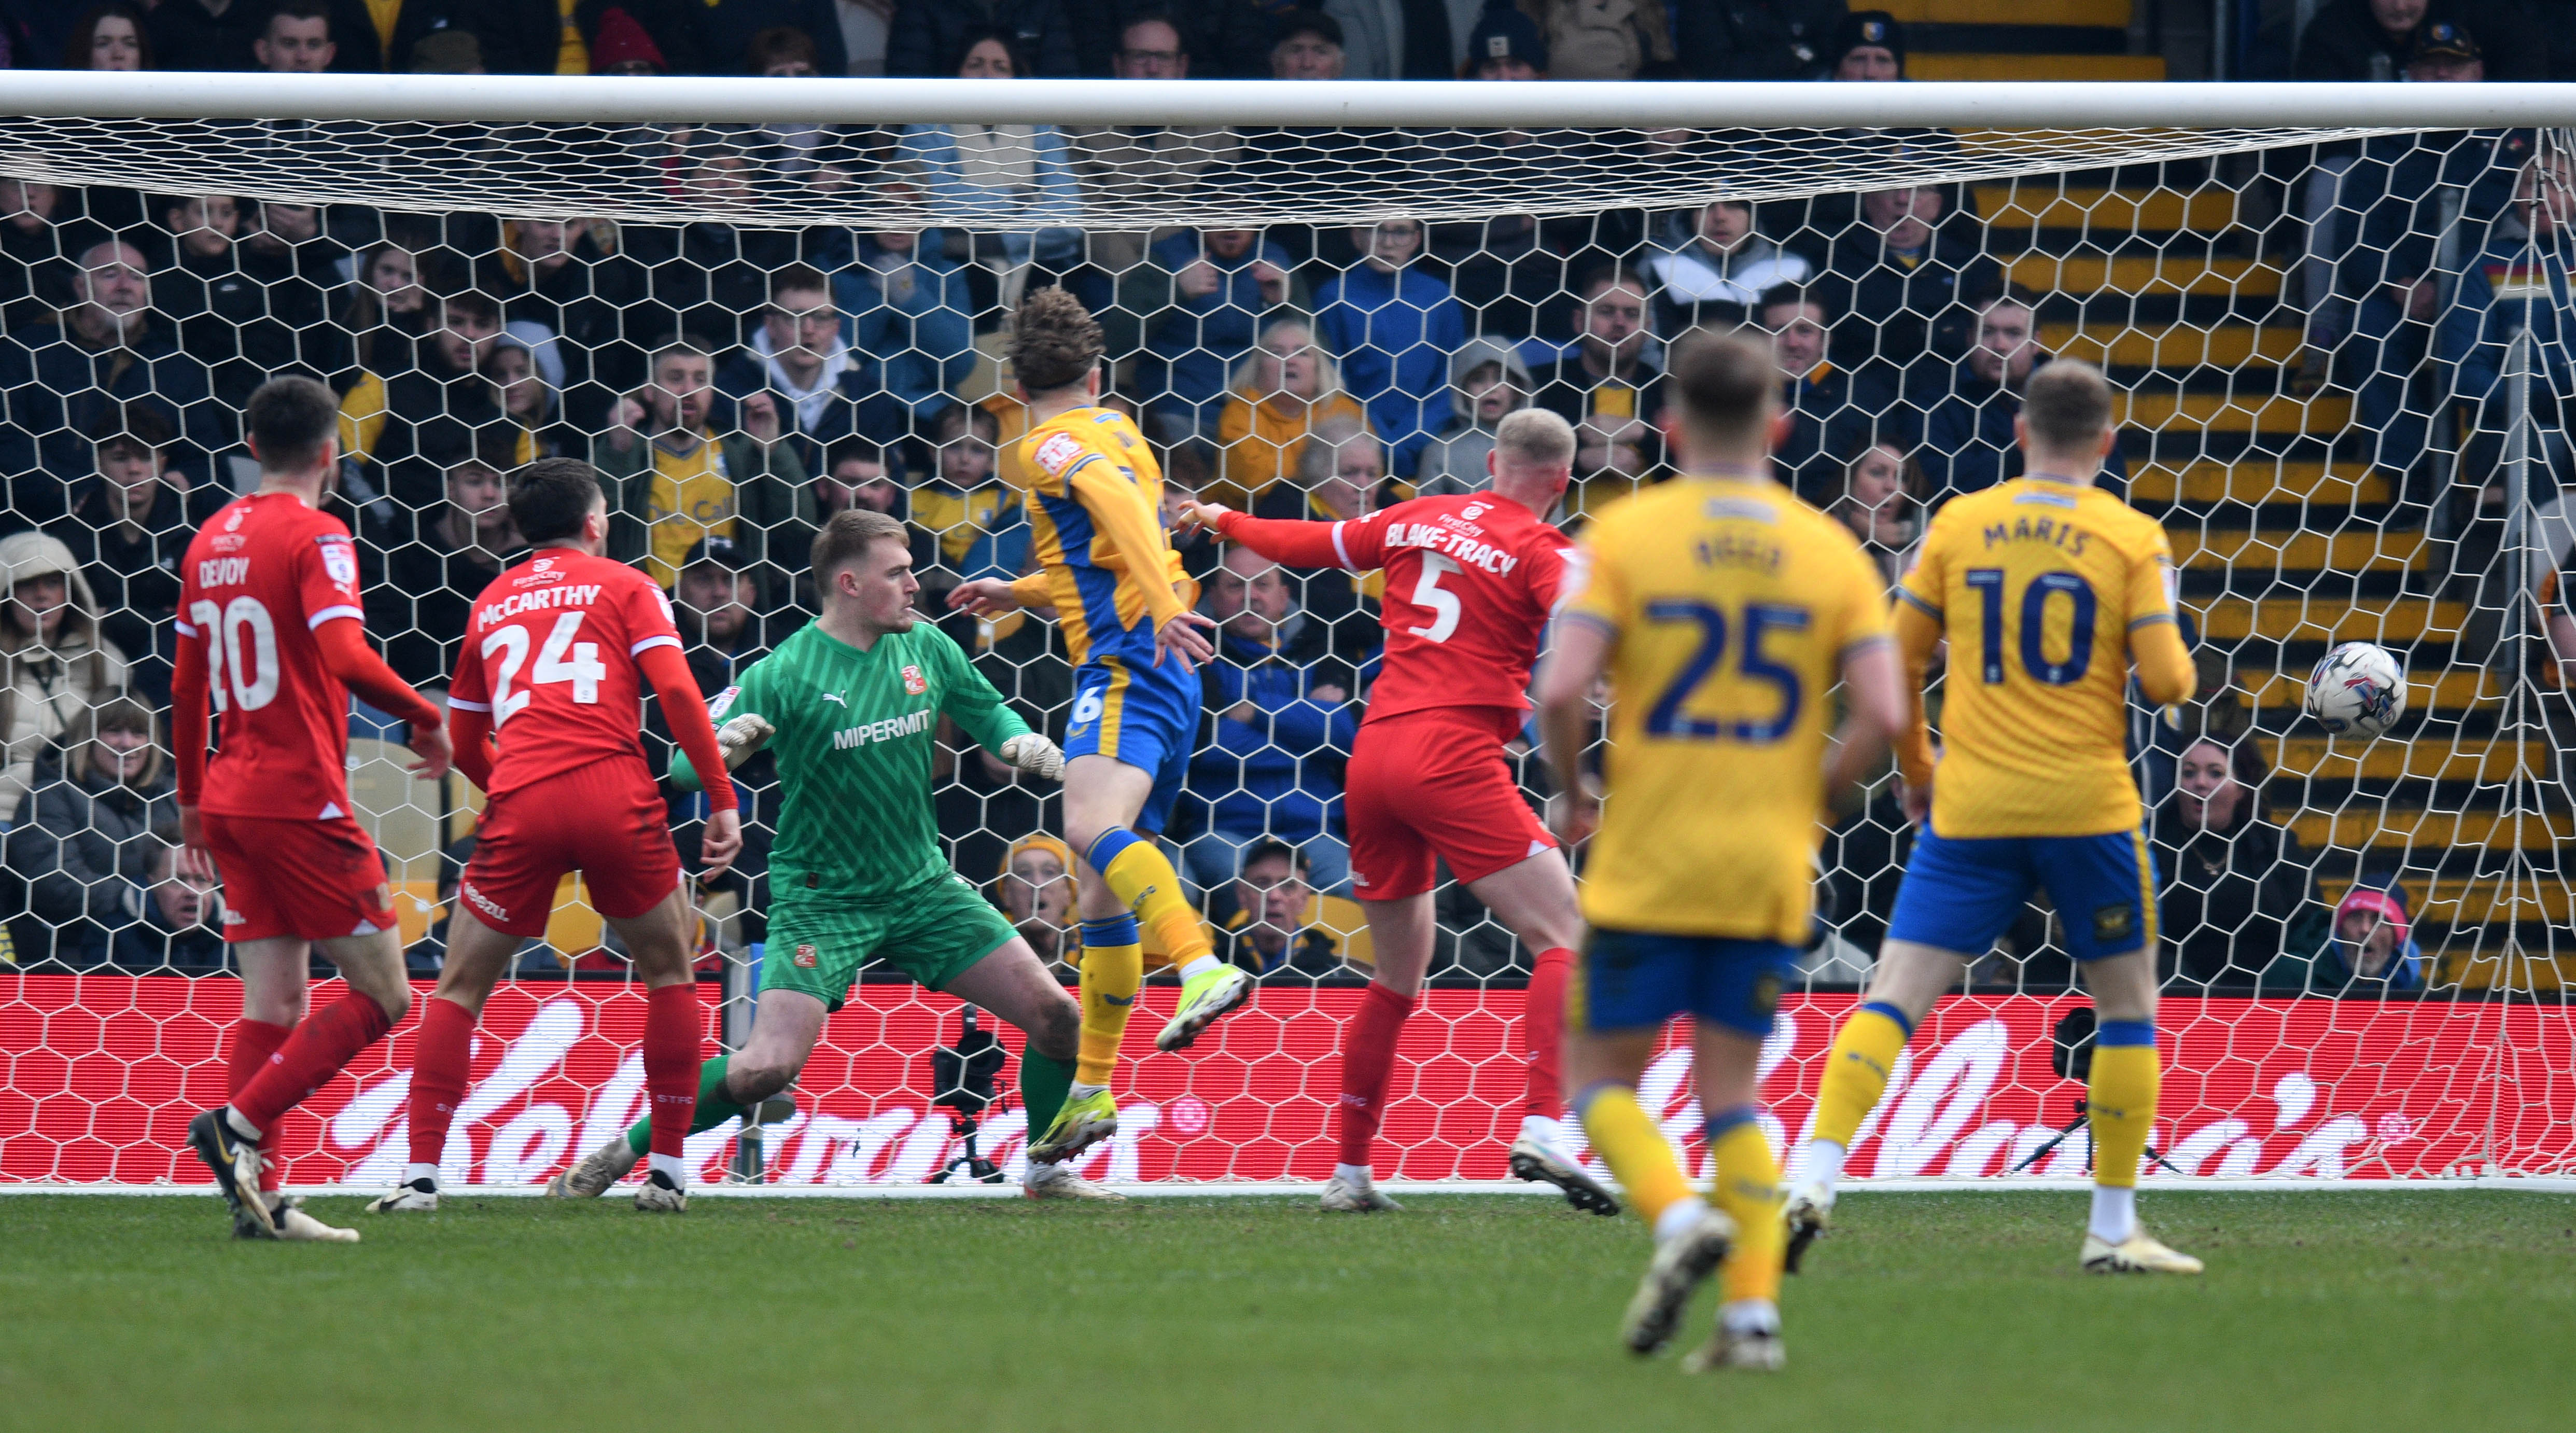 'Beyond frustration' - Gunning's annoyance after Swindon concede 'terrible' goals at Mansfield 